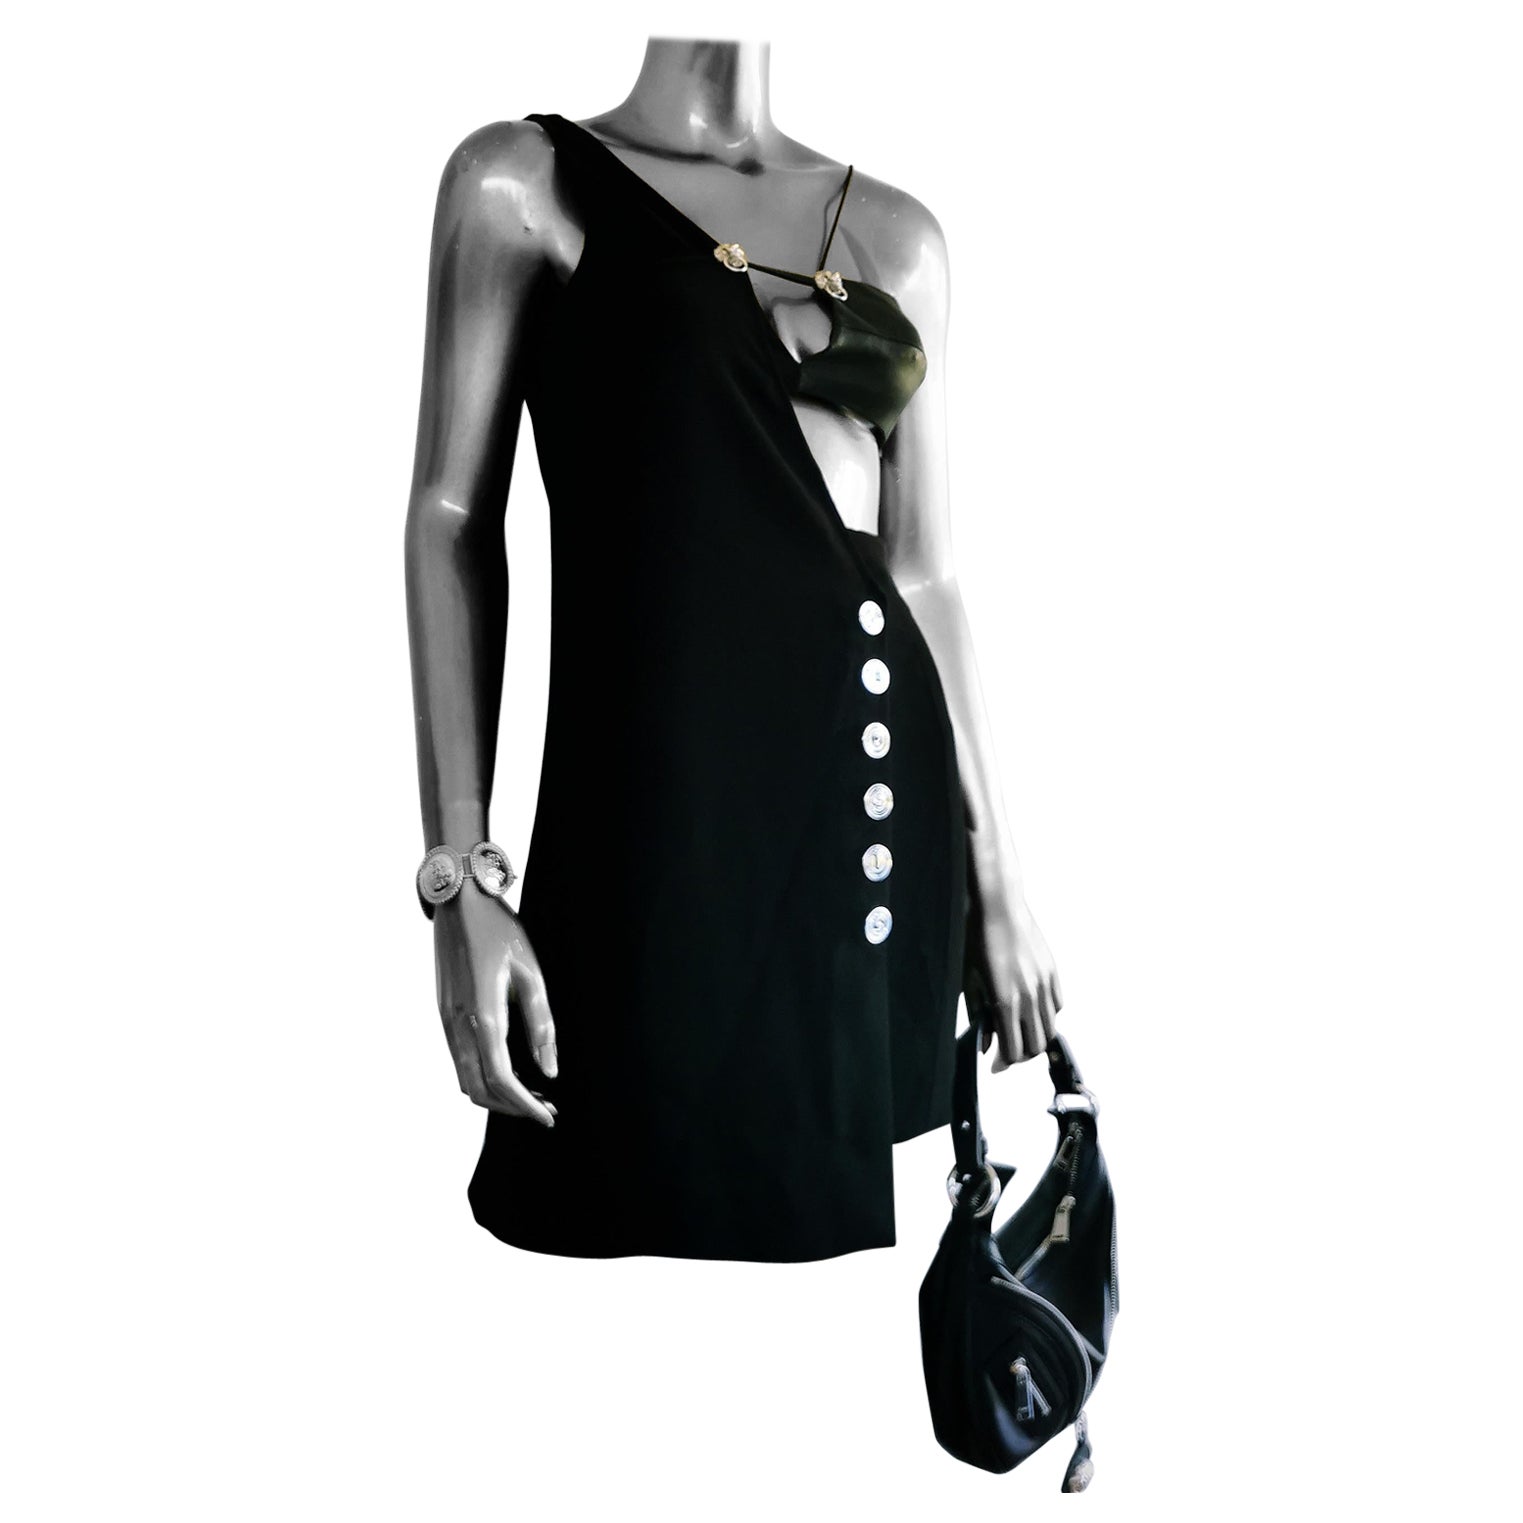 Versus by ANTHONY VACCARELLO Versace Black Lion Assymetrical Cocktail Dress For Sale